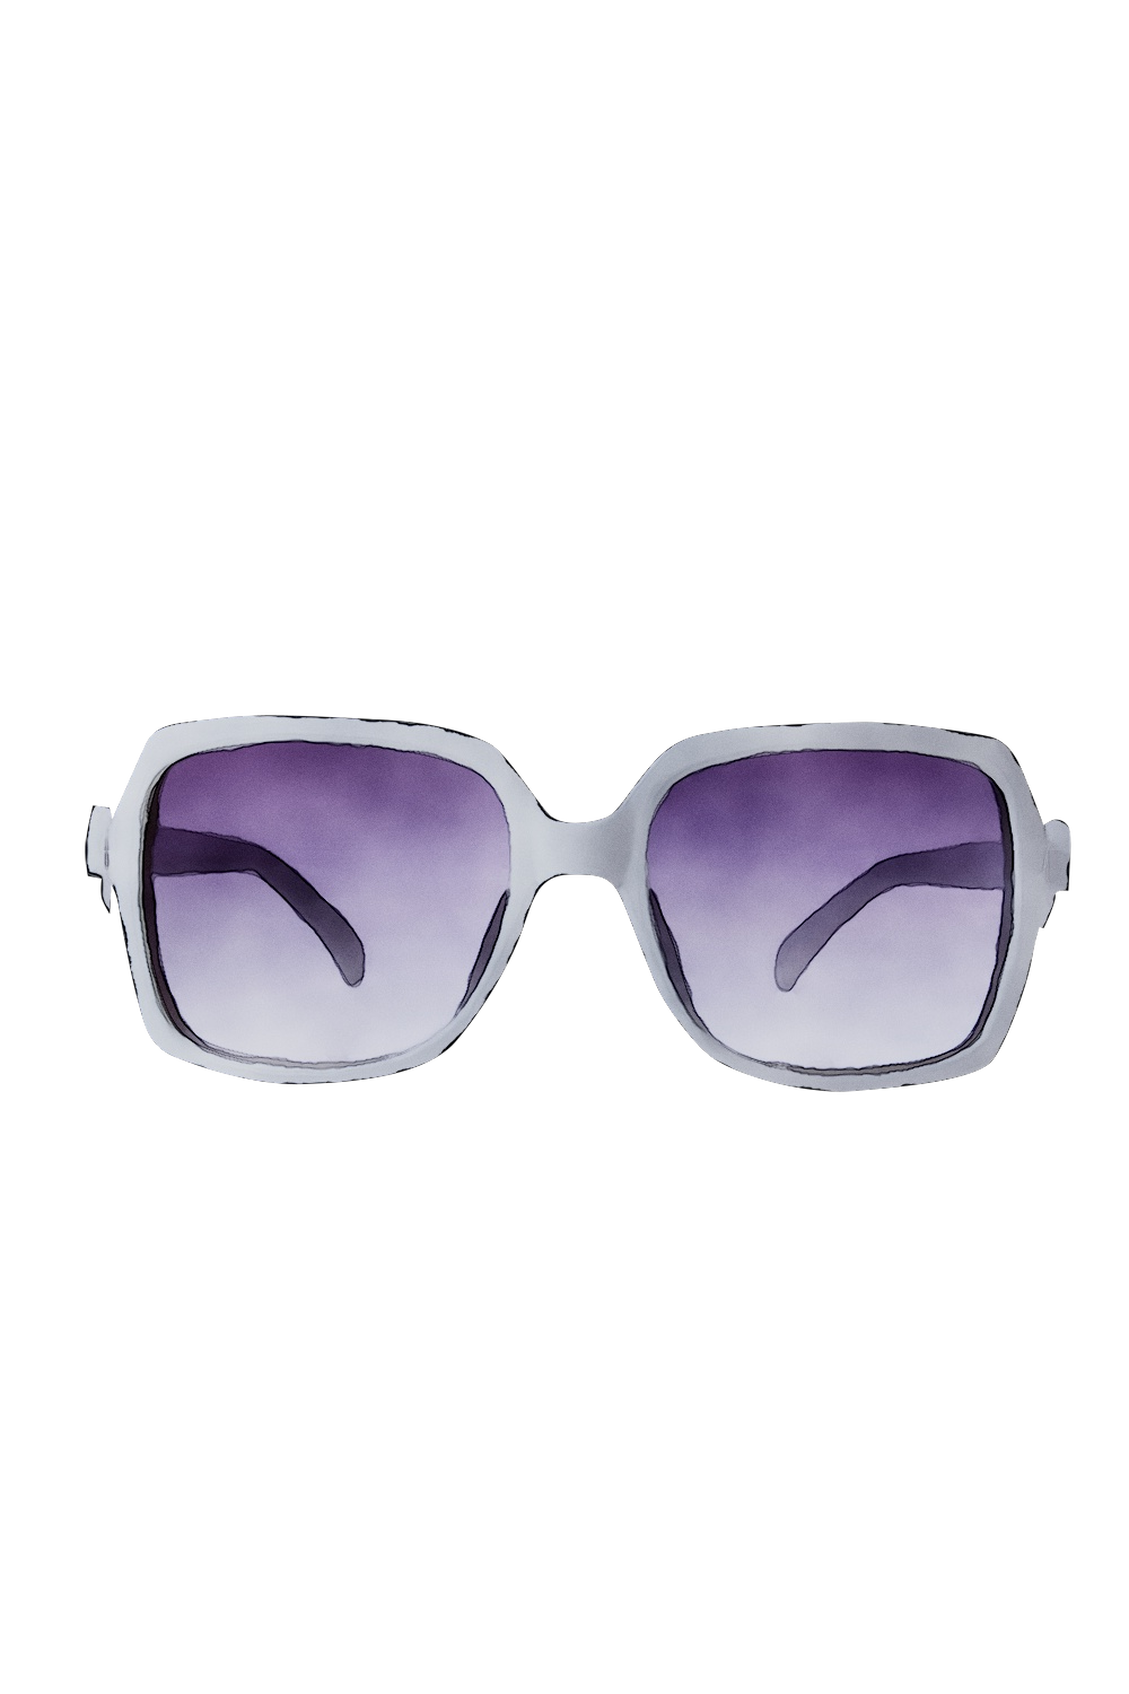 Design Product Goggles Sunglasses PNG Image High Quality Clipart